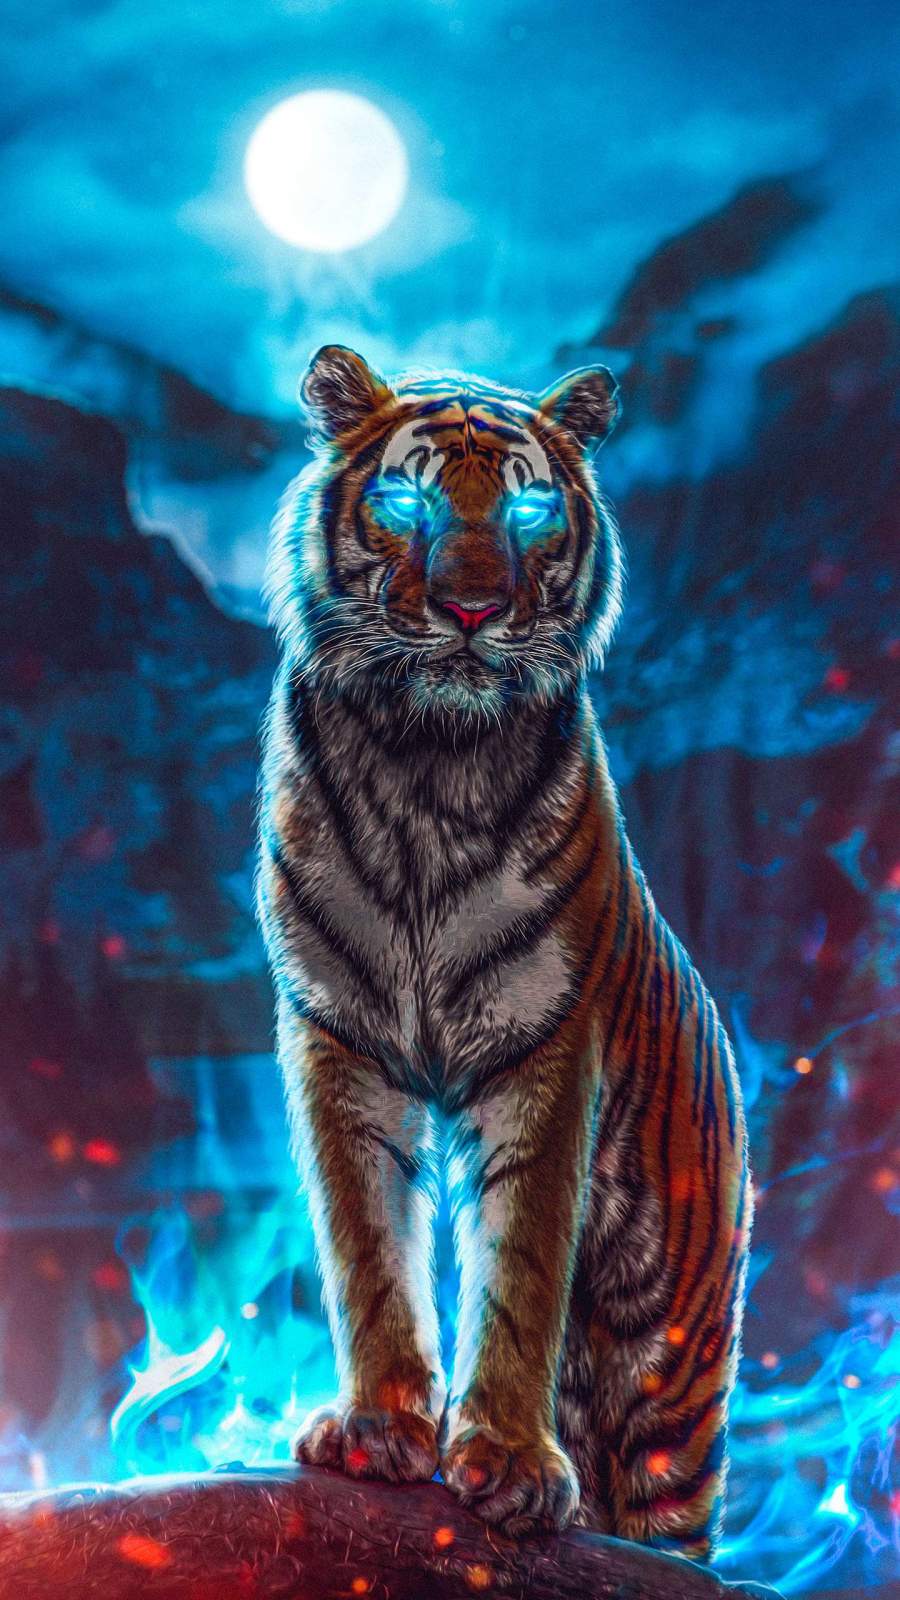 The Tiger IPhone Wallpaper - IPhone Wallpapers : iPhone Wallpapers